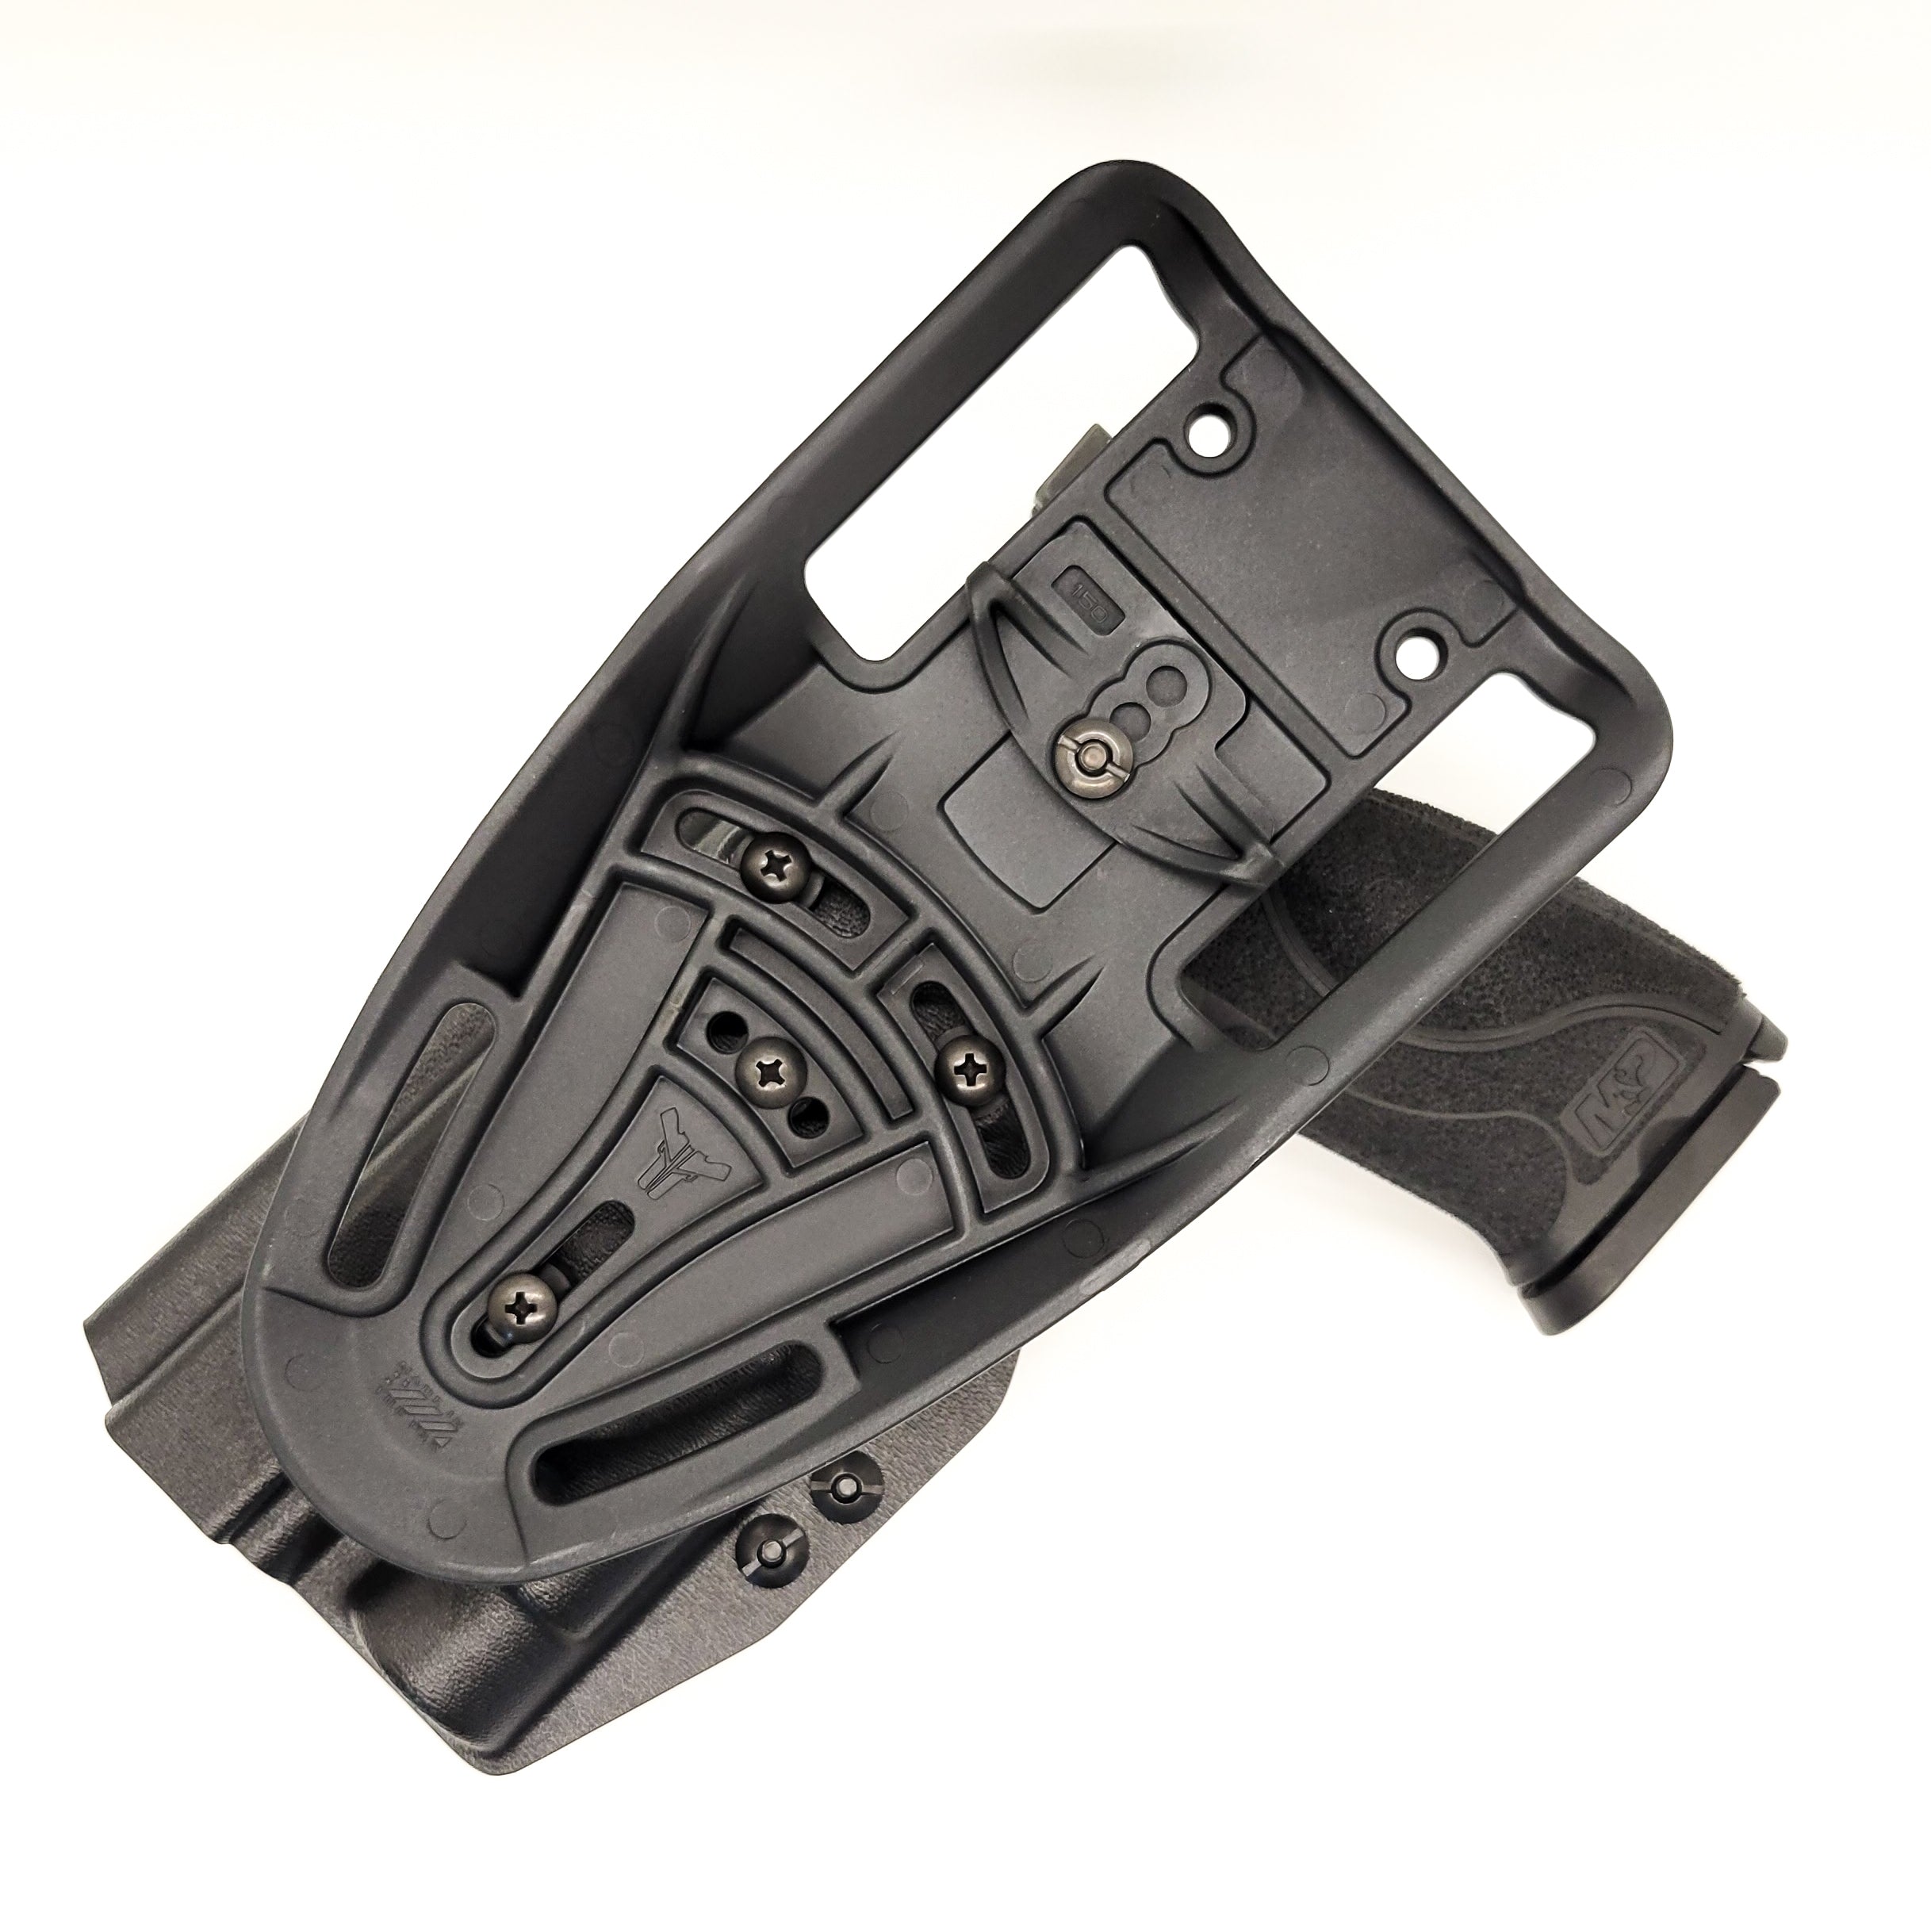 Outside Waistband Kydex Taco Style Holster designed to fit the Smith and Wesson M&P 10MM M2.0 pistol with thumb safety and Streamlight TLR-1 or TLR-1 HL. The holster is designed to fit both the 4" and 4.6" barrel lengths.  Full sweat guard, adjustable retention, profiled for a red dot sight. Proudly made in the USA.